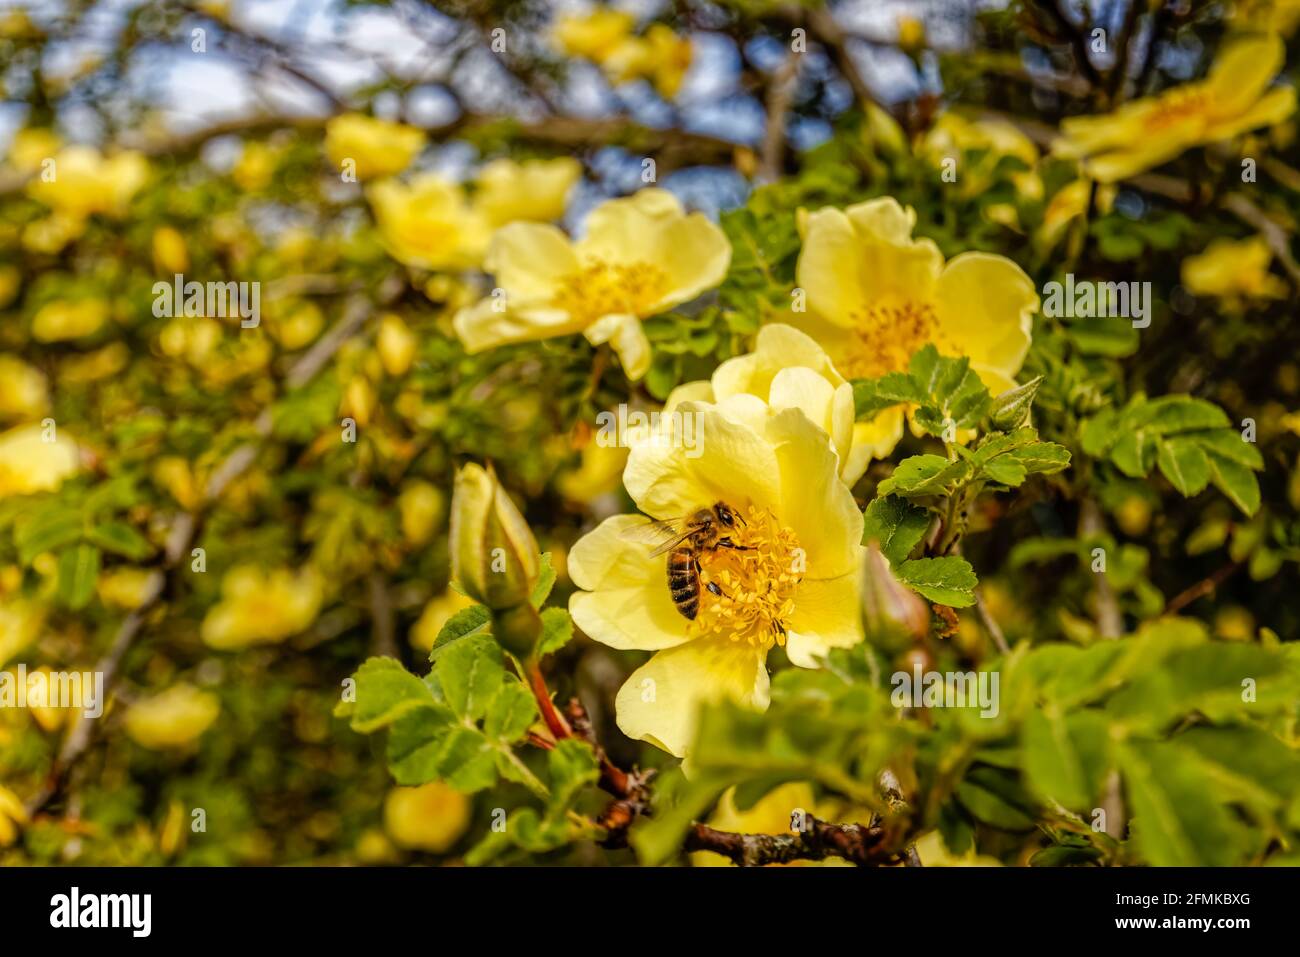 A honey bee collects pollen from stamens of an early flowering large yellow shrub rose, single flowers of Rosa xanthina var. Spontanea 'Canary Bird' Stock Photo